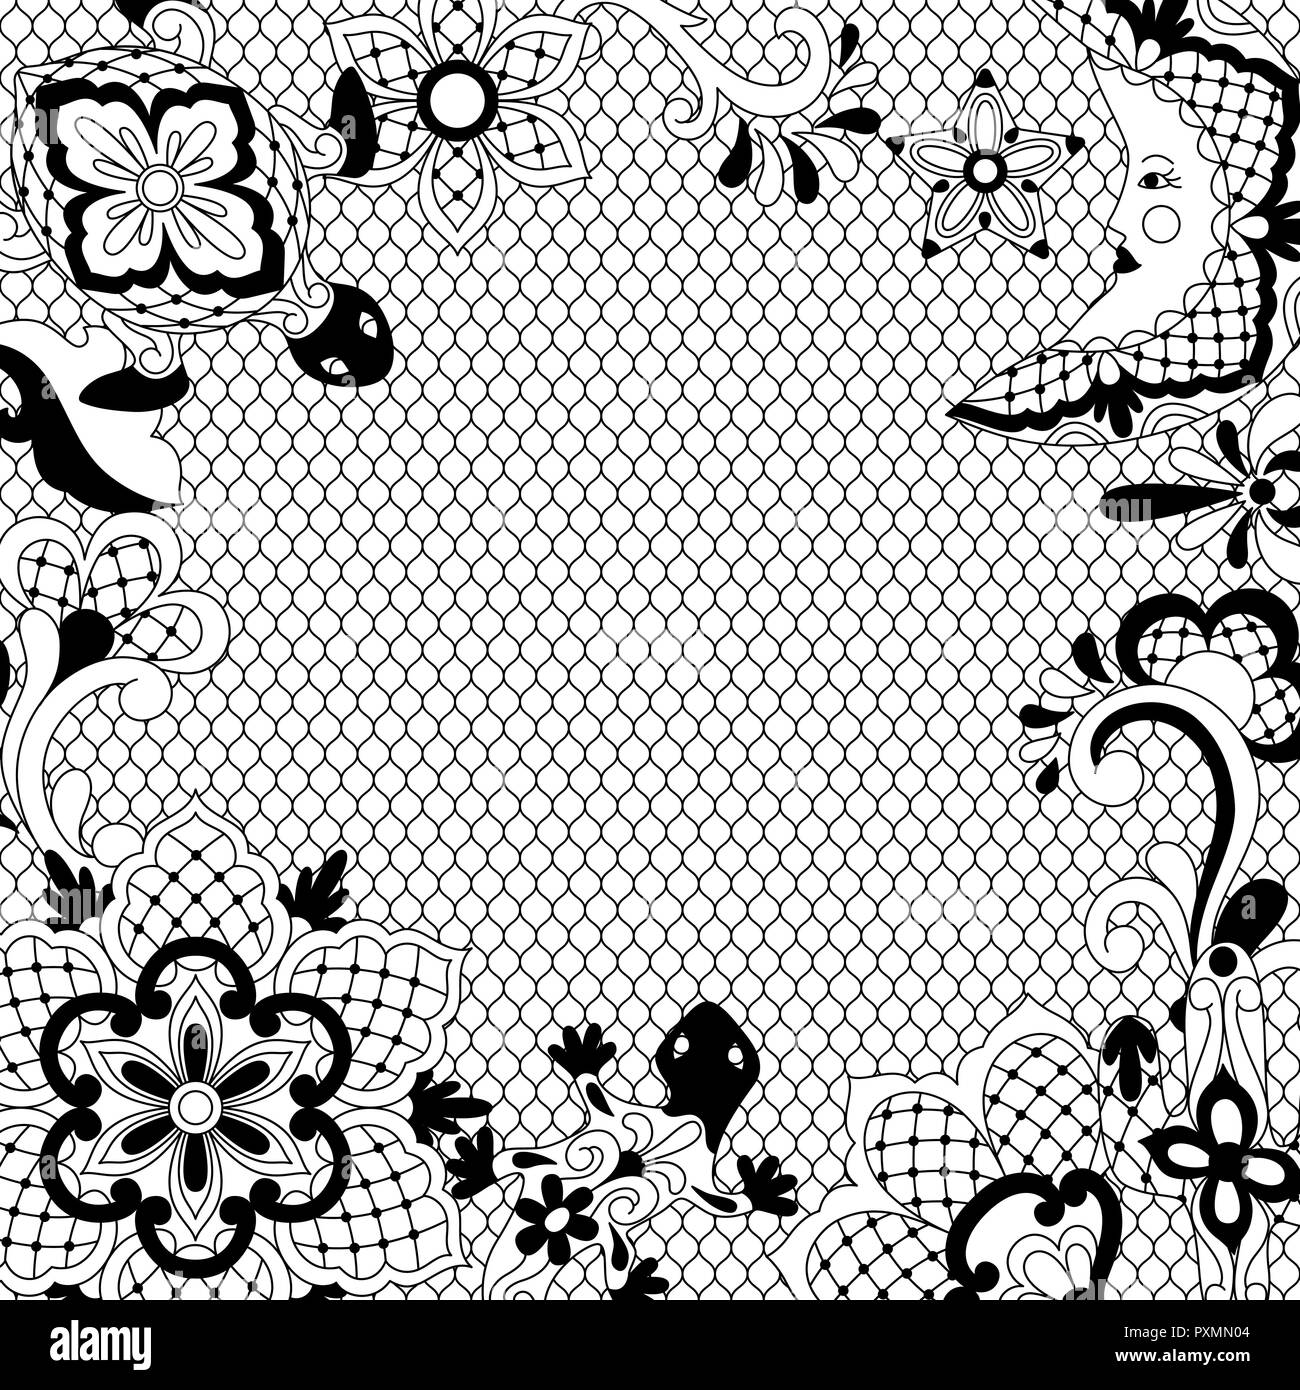 Mexican lace background design. Stock Vector